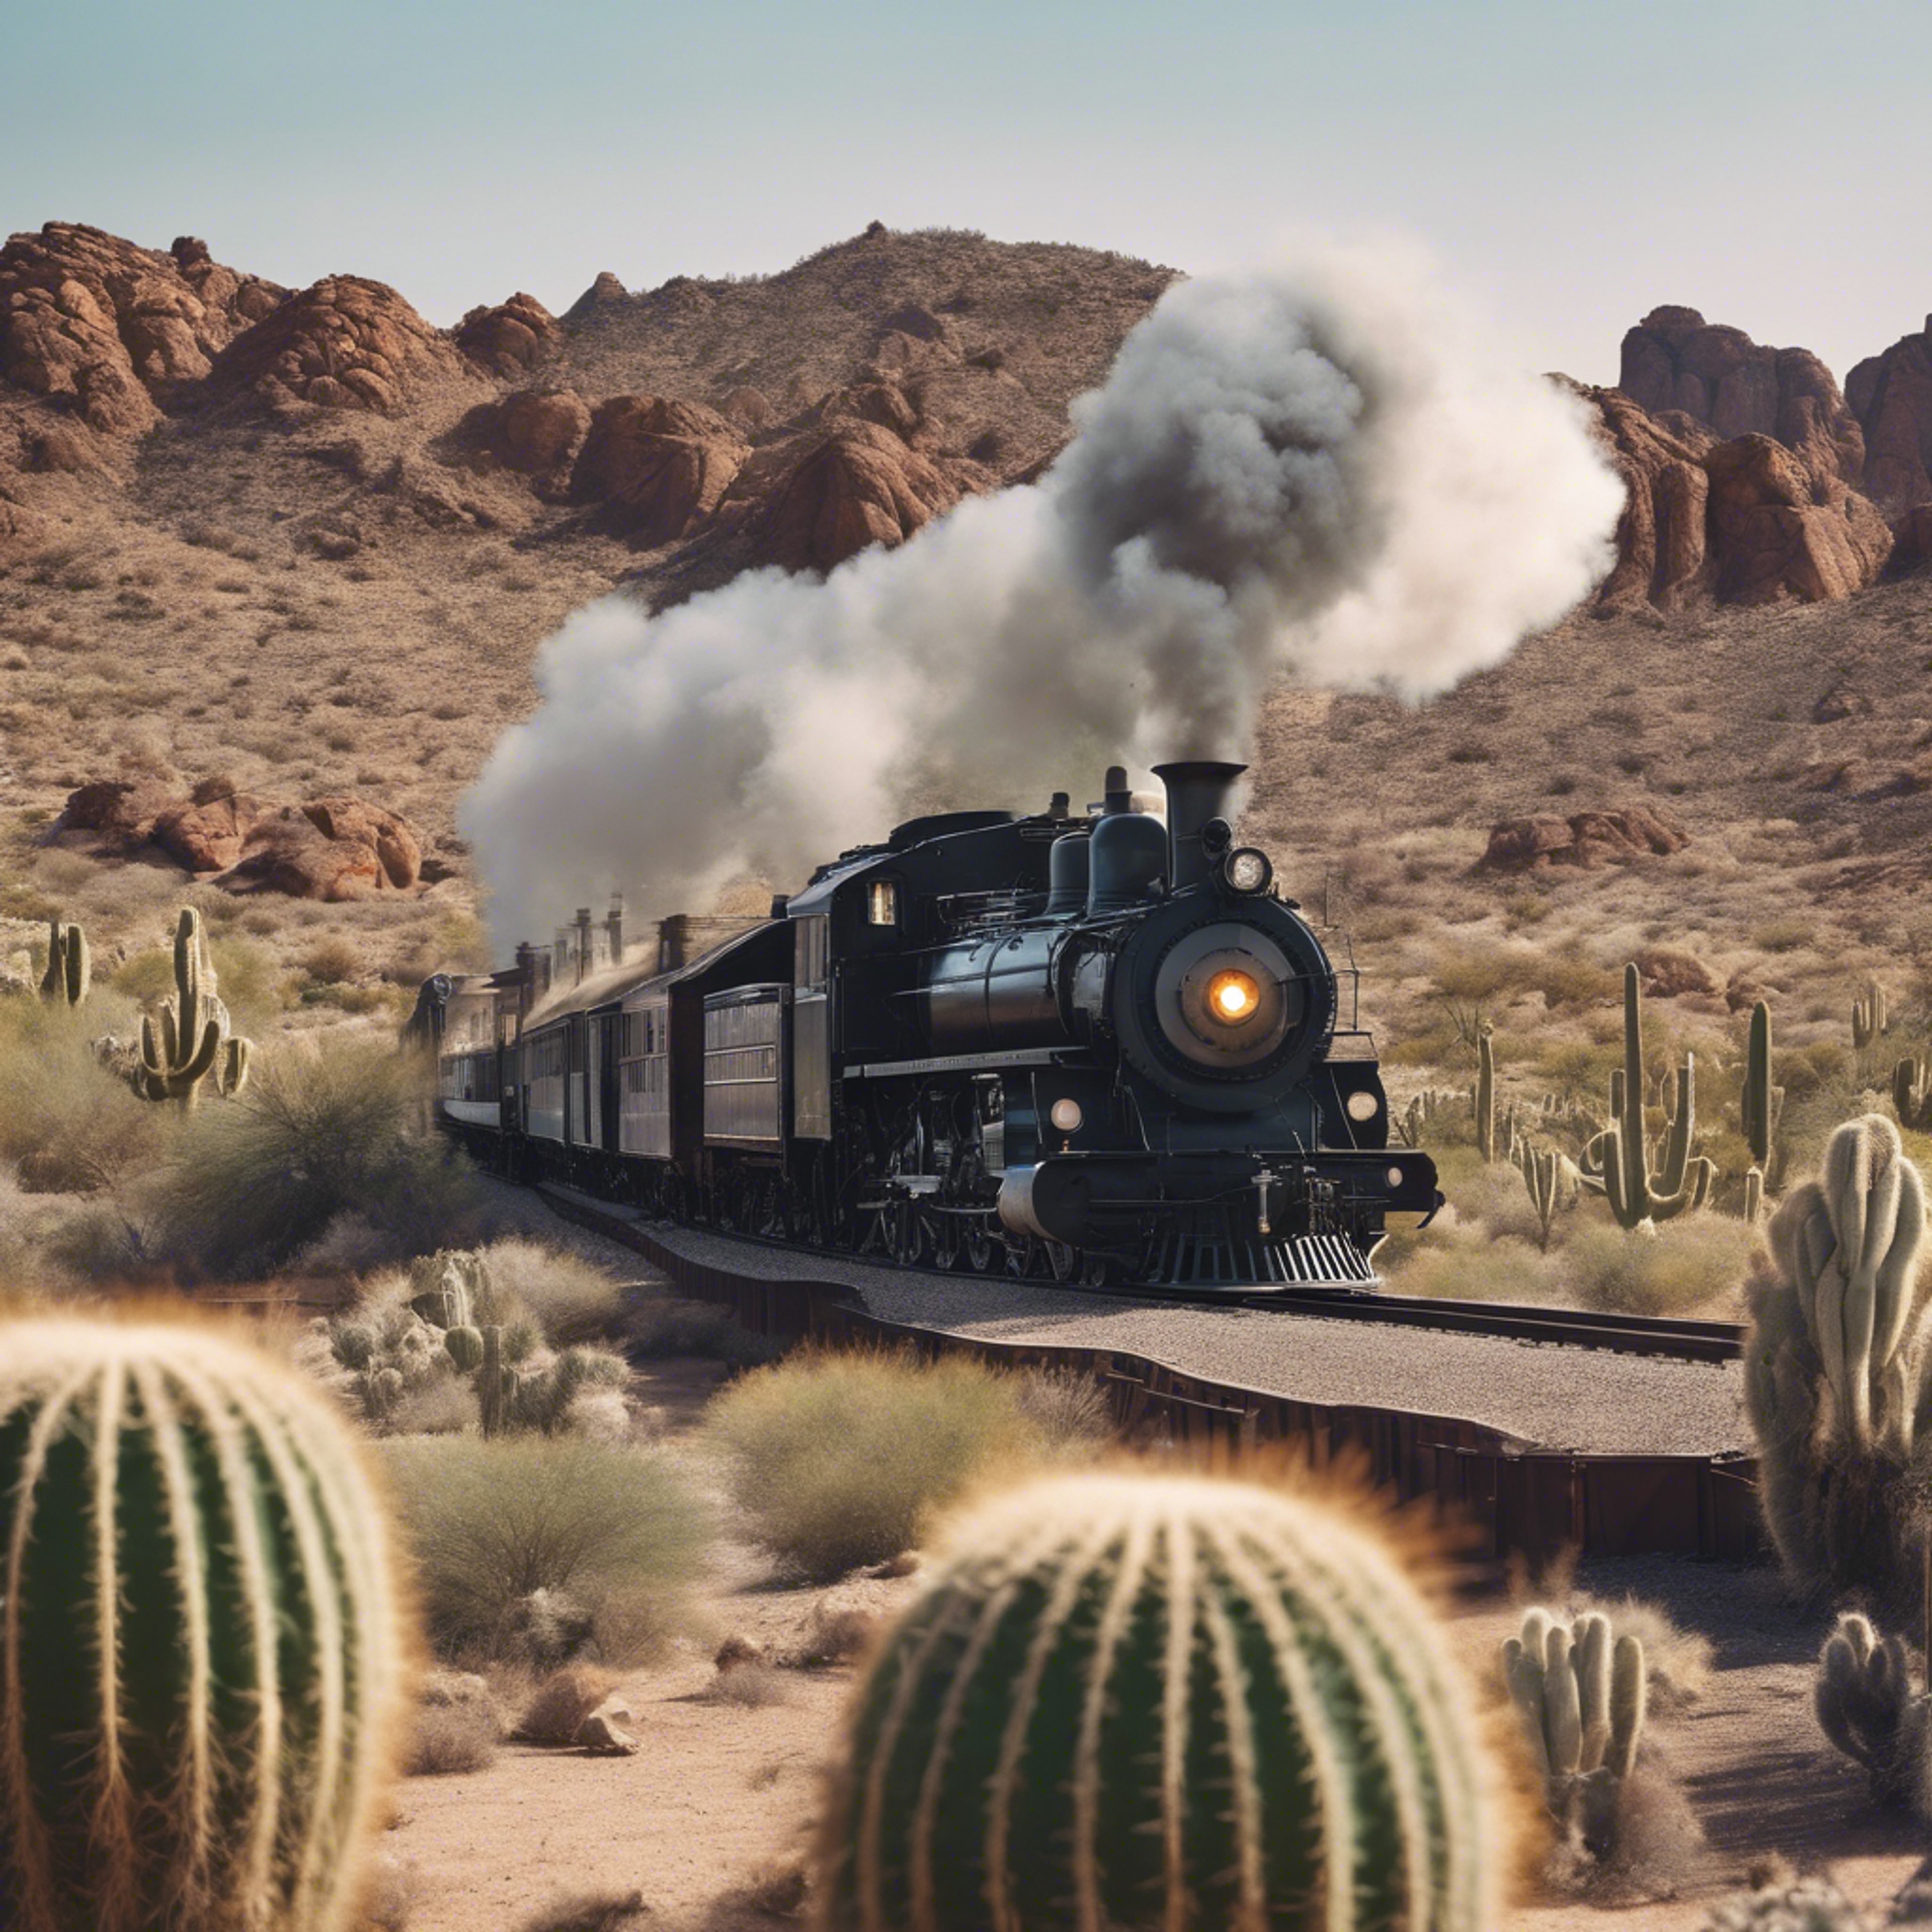 A locomotive steam train rushing across the barren Western landscape surrounded by towering cacti.壁紙[f5a4930d44454dd795f5]